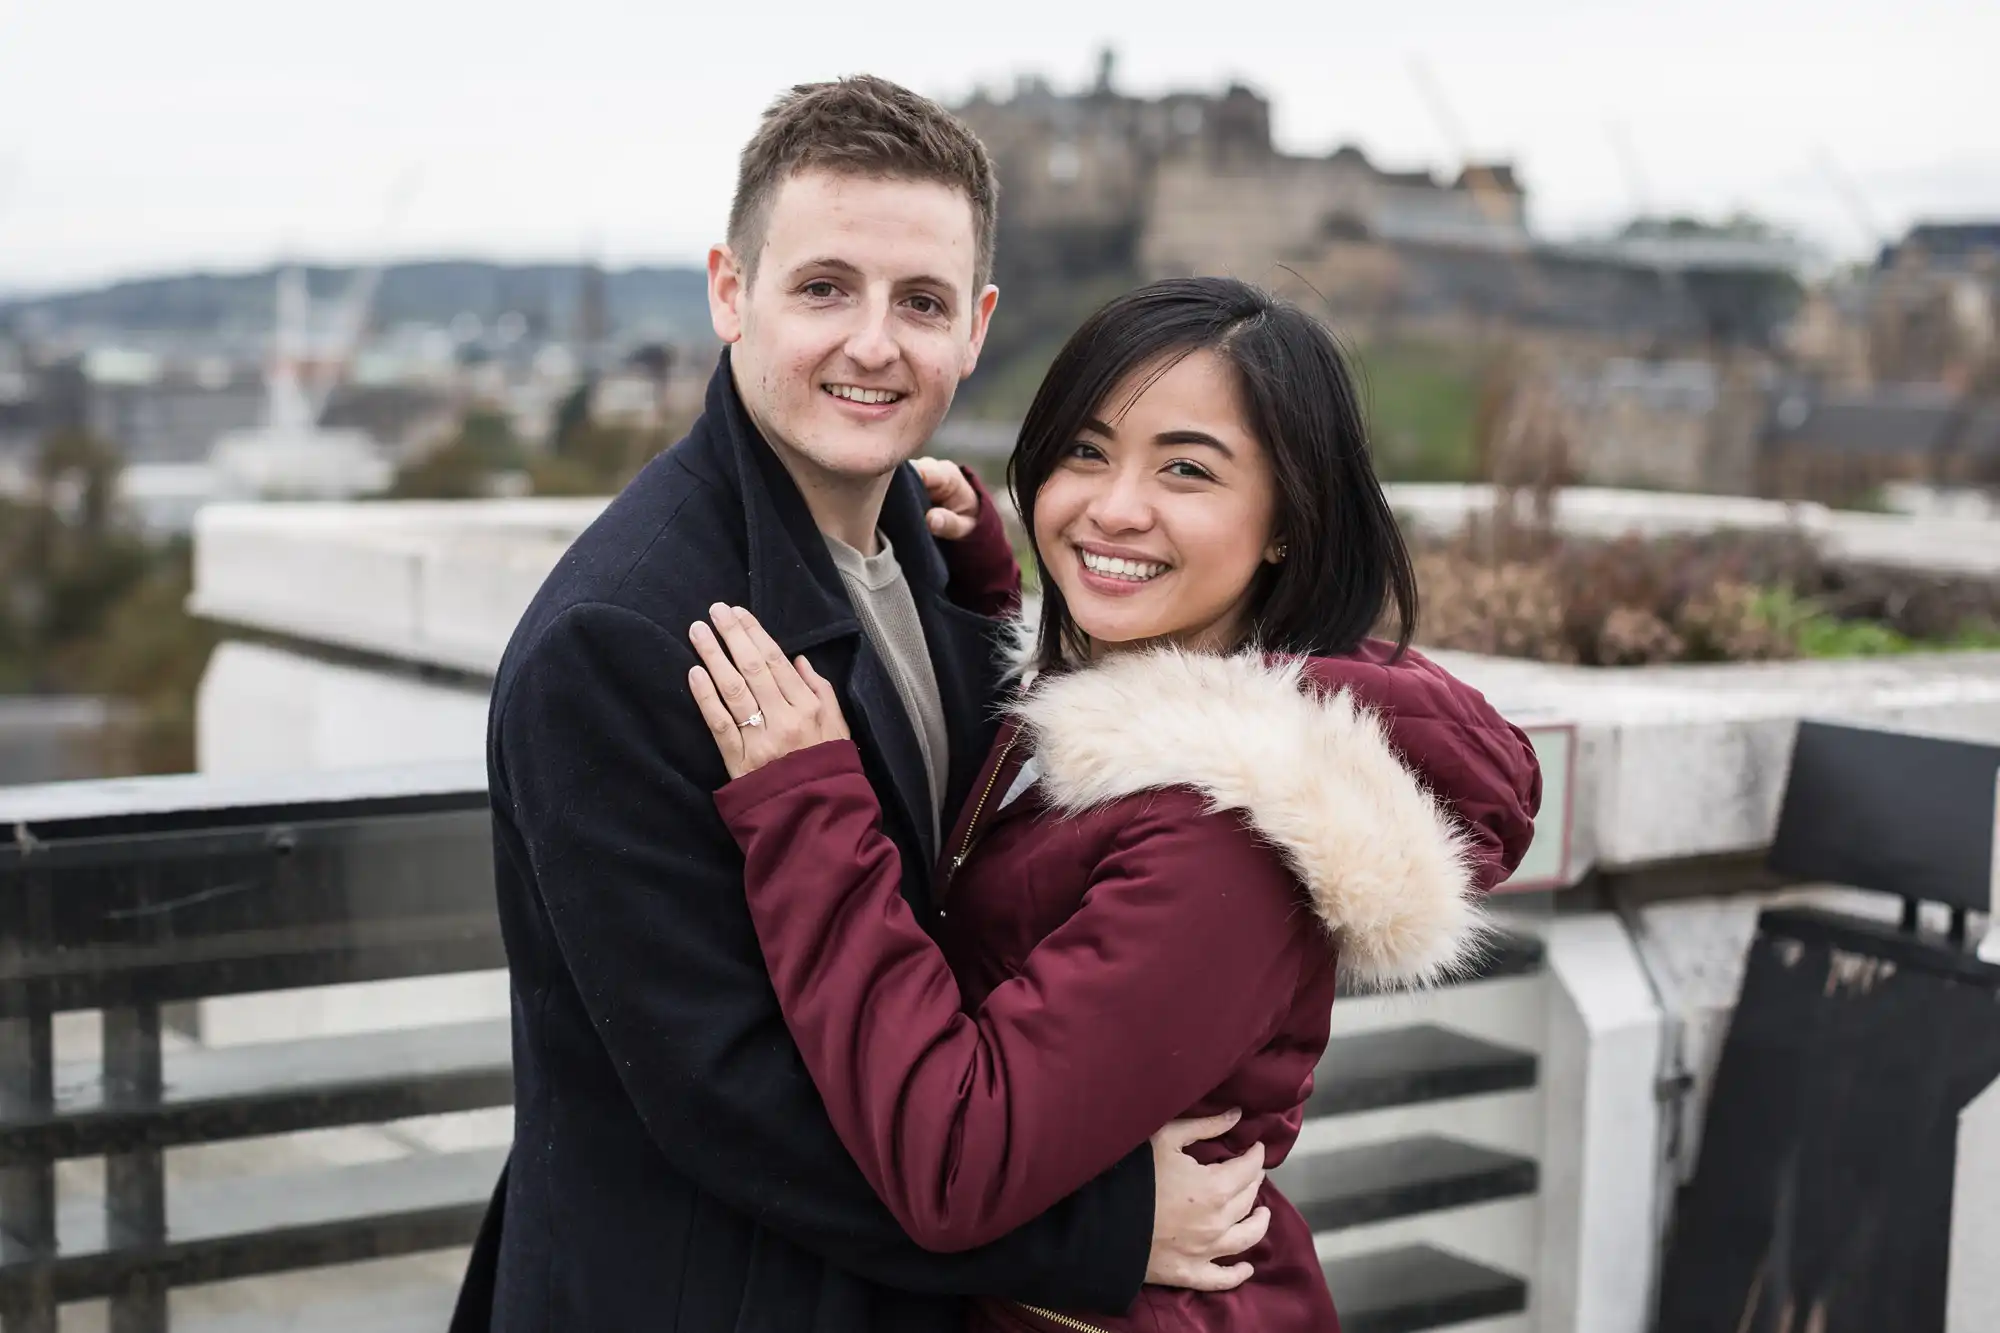 A smiling couple embracing on a rooftop with a castle visible in the background.